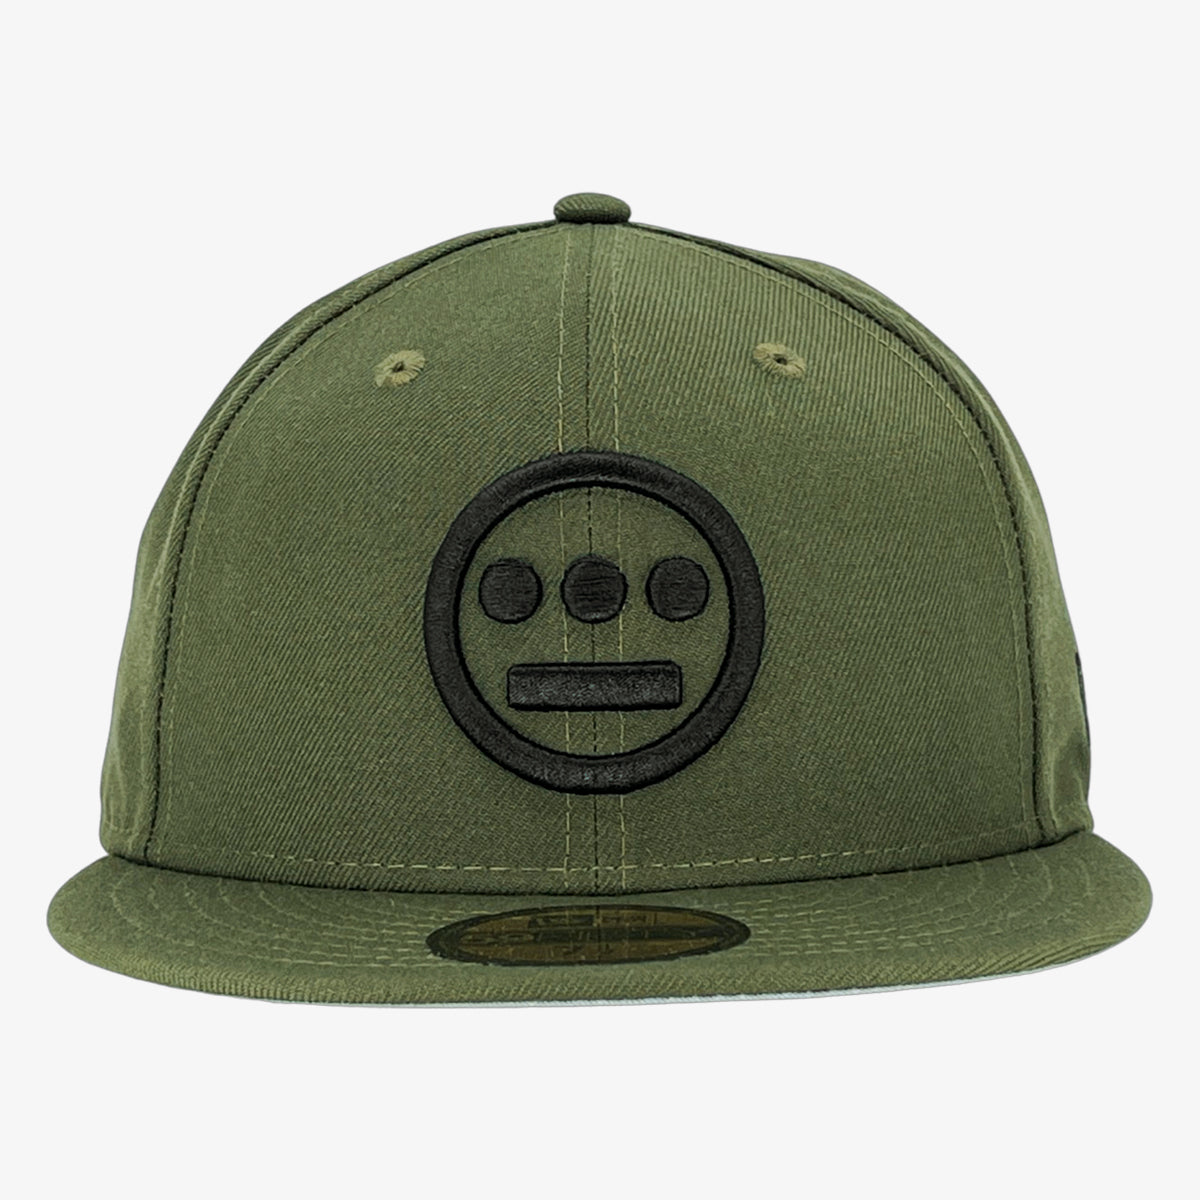 Rifle green New Era cap with black embroidered Hieroglyphics hip-hop logo on the crown.